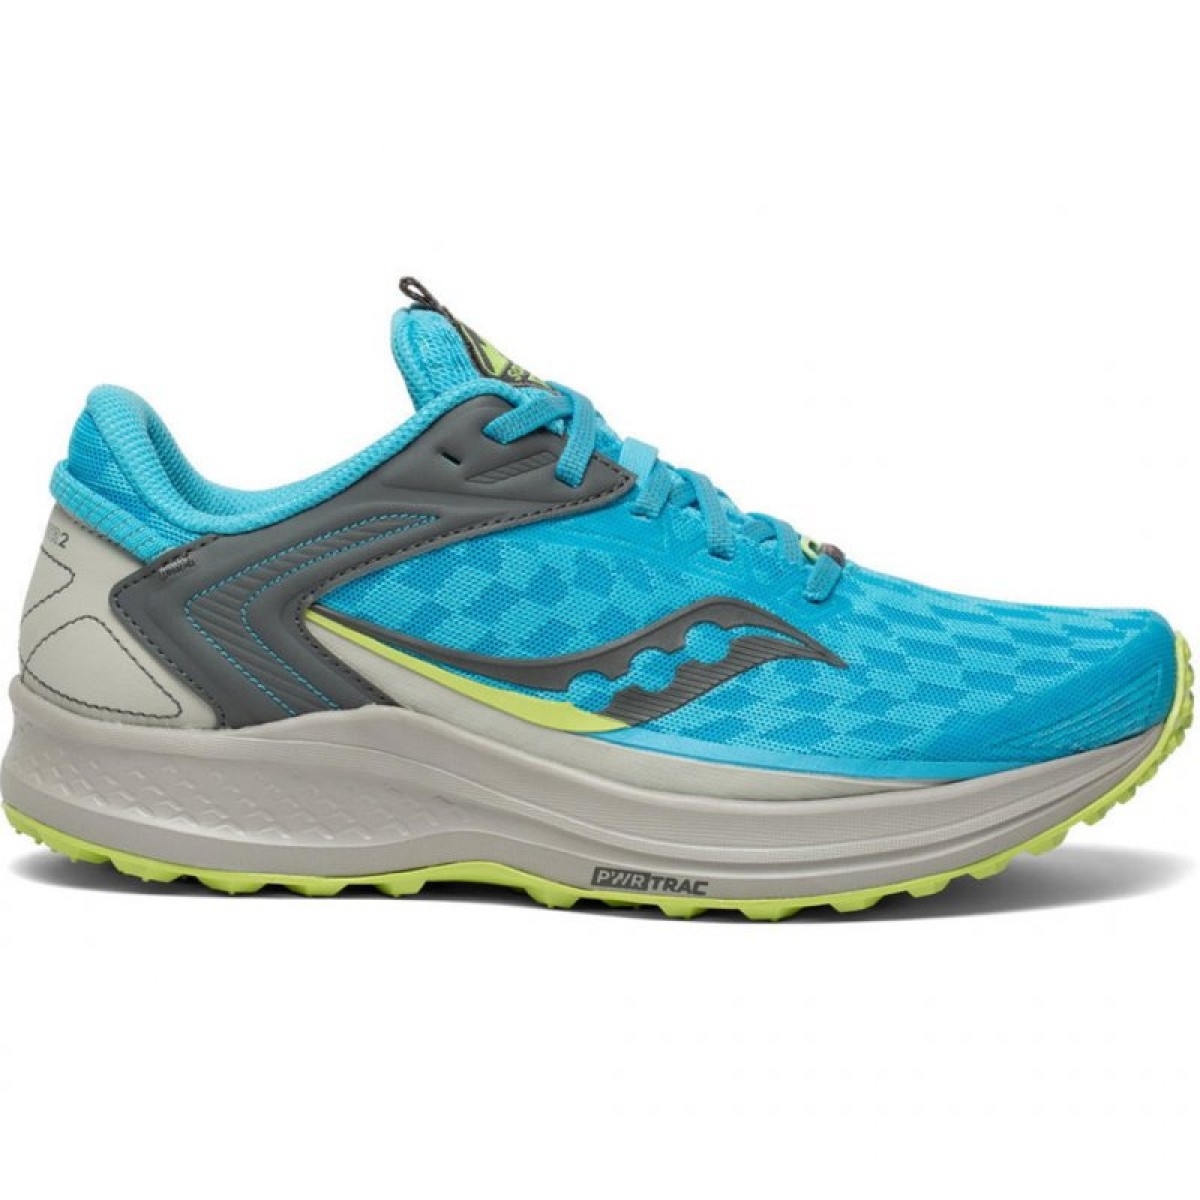 Saucony Canyon TR2 Blaze Blue / Lime Road to rugged. For trails, roads ...